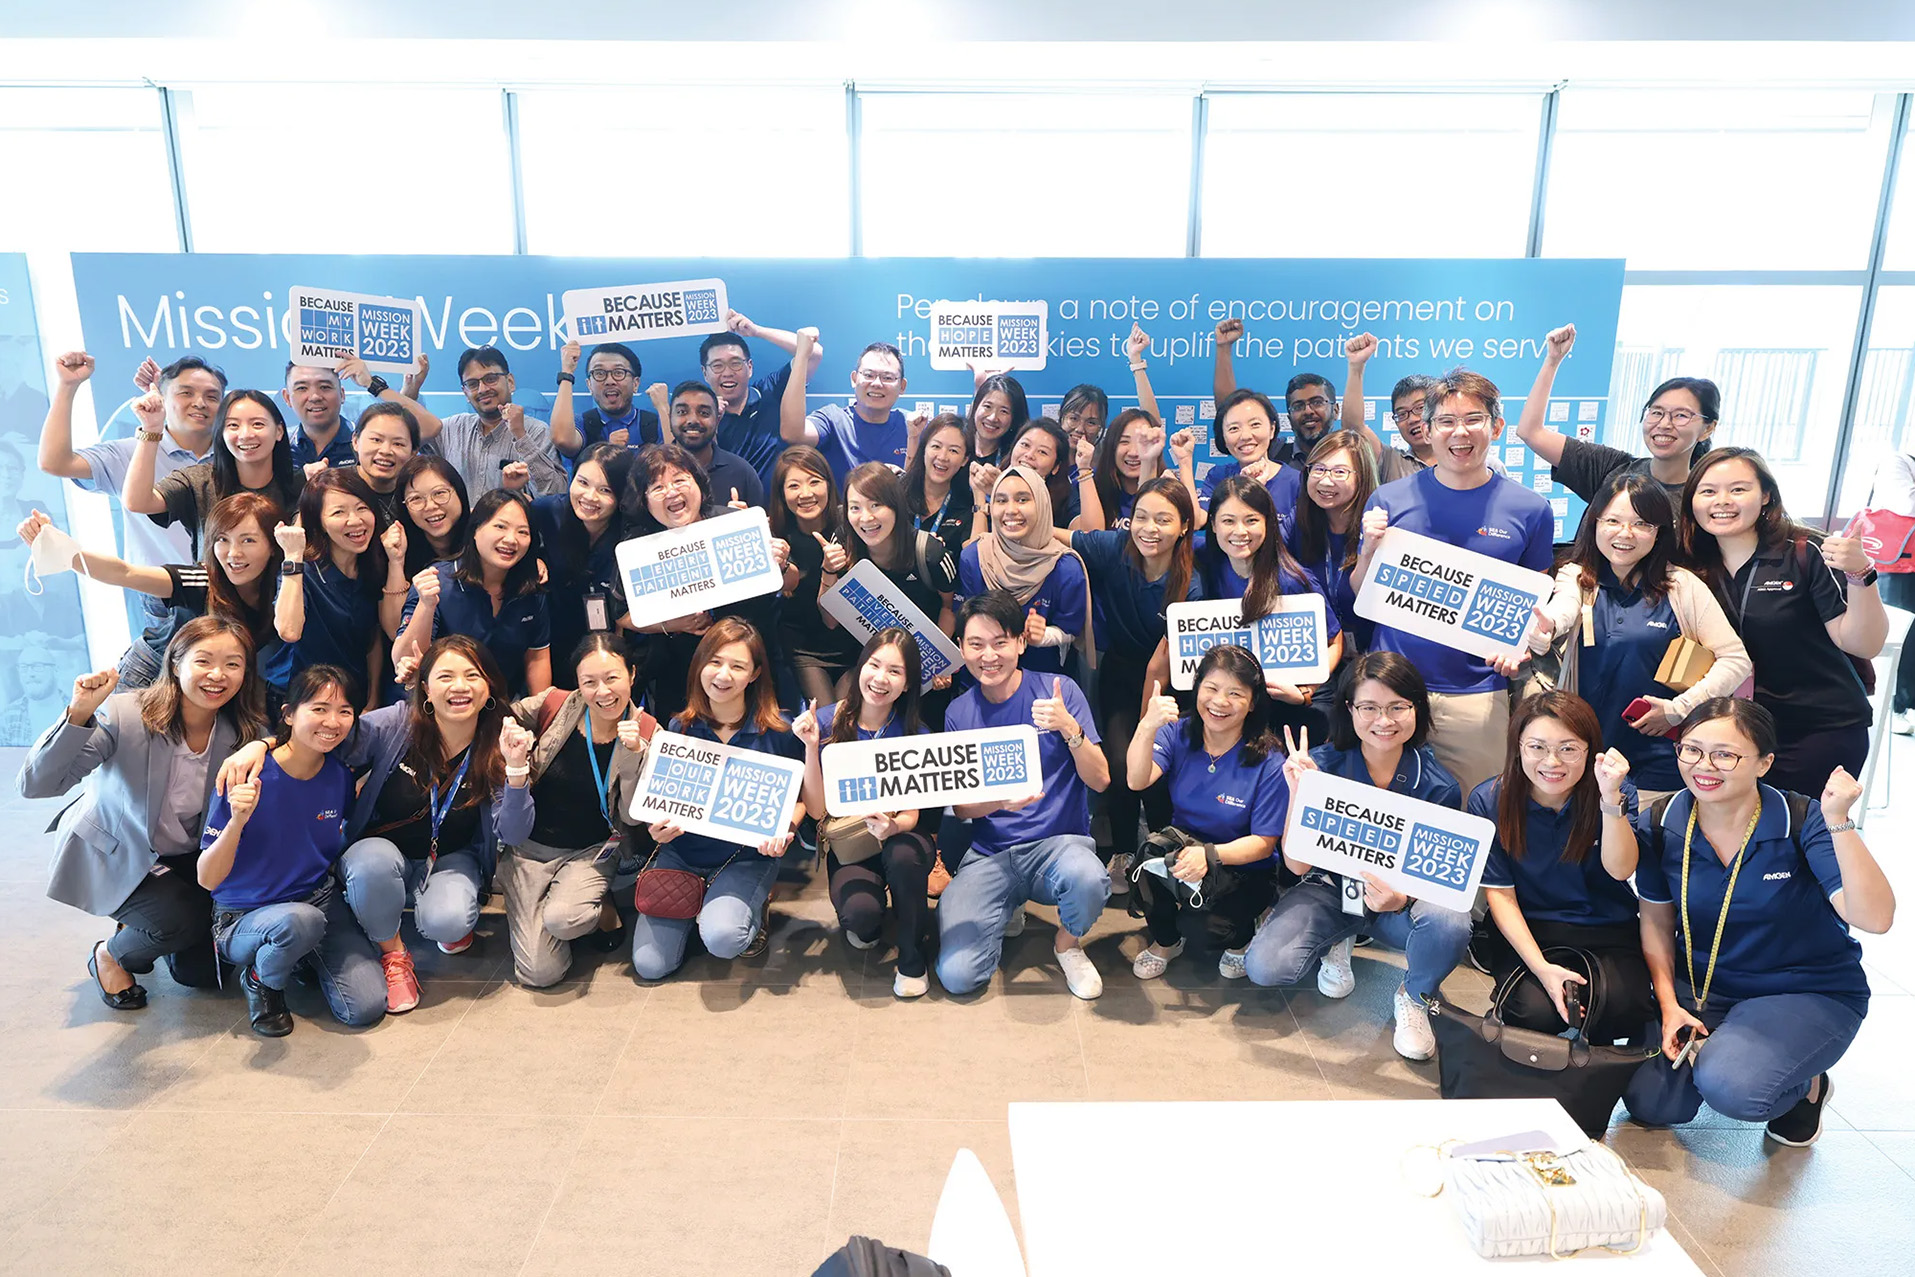 Mission Week at Amgen's headquarters in Singapore